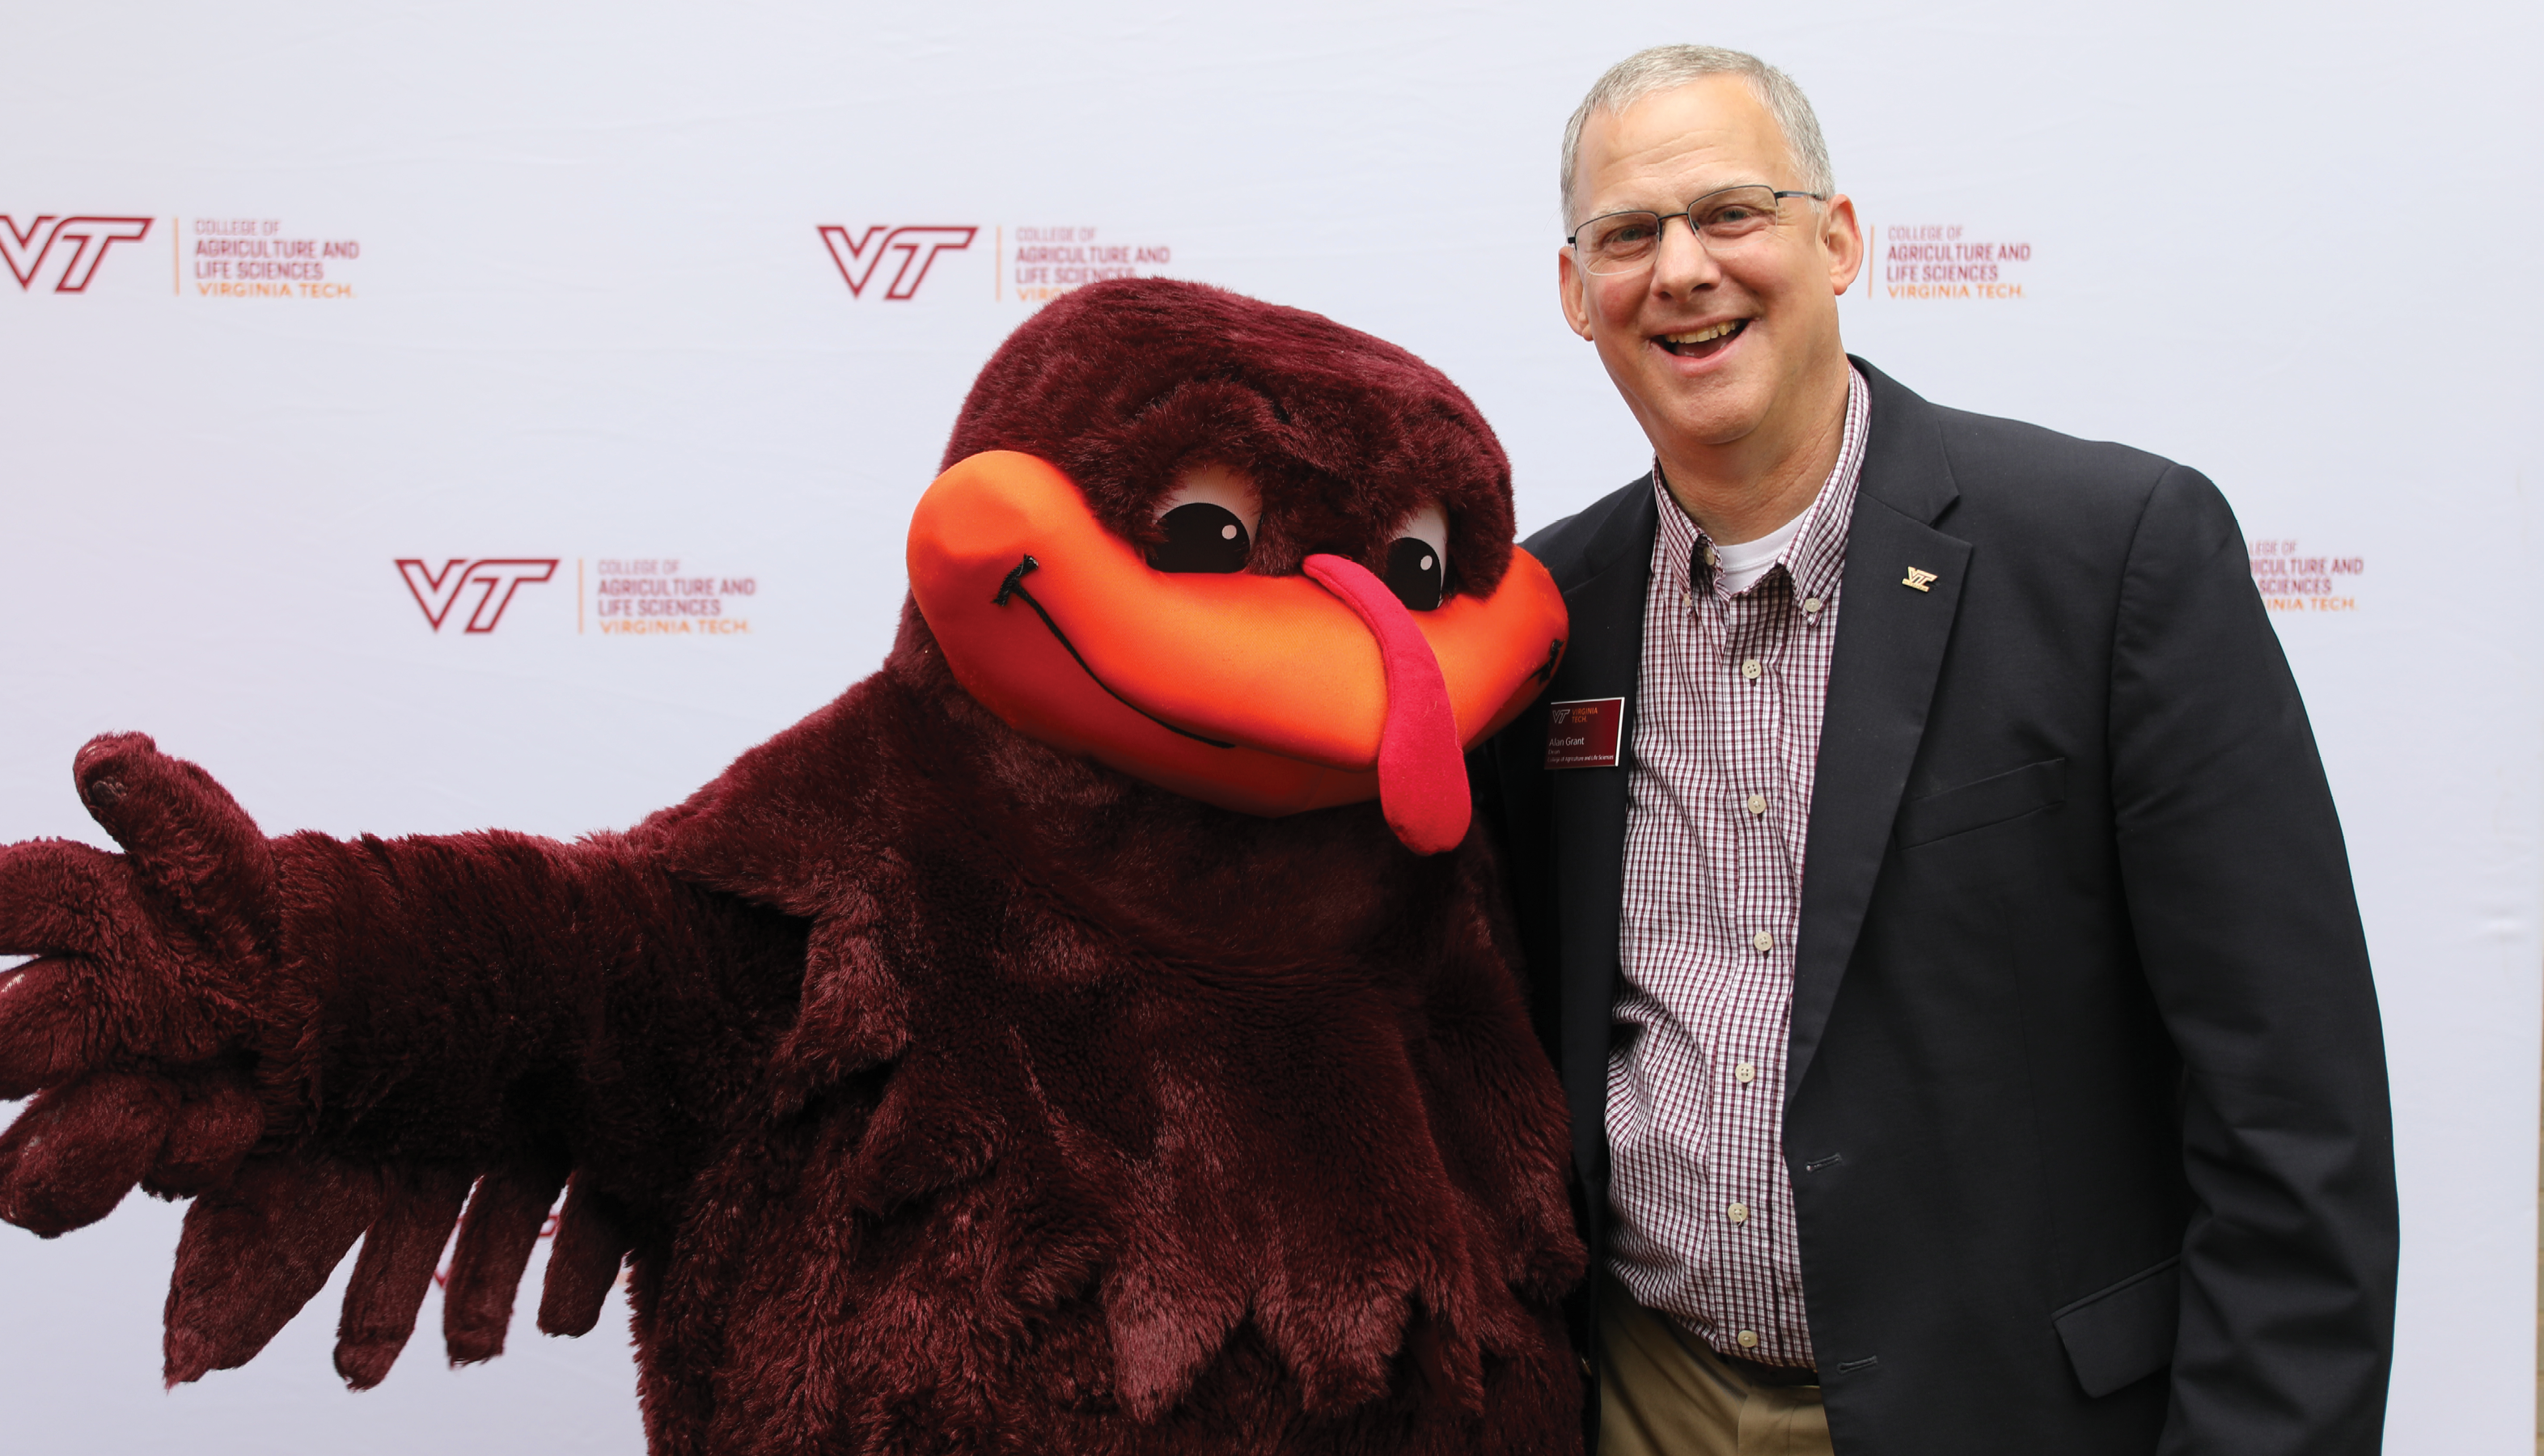 Alan L. Grant, dean of the Virginia Tech College of Agriculture and Life Sciences